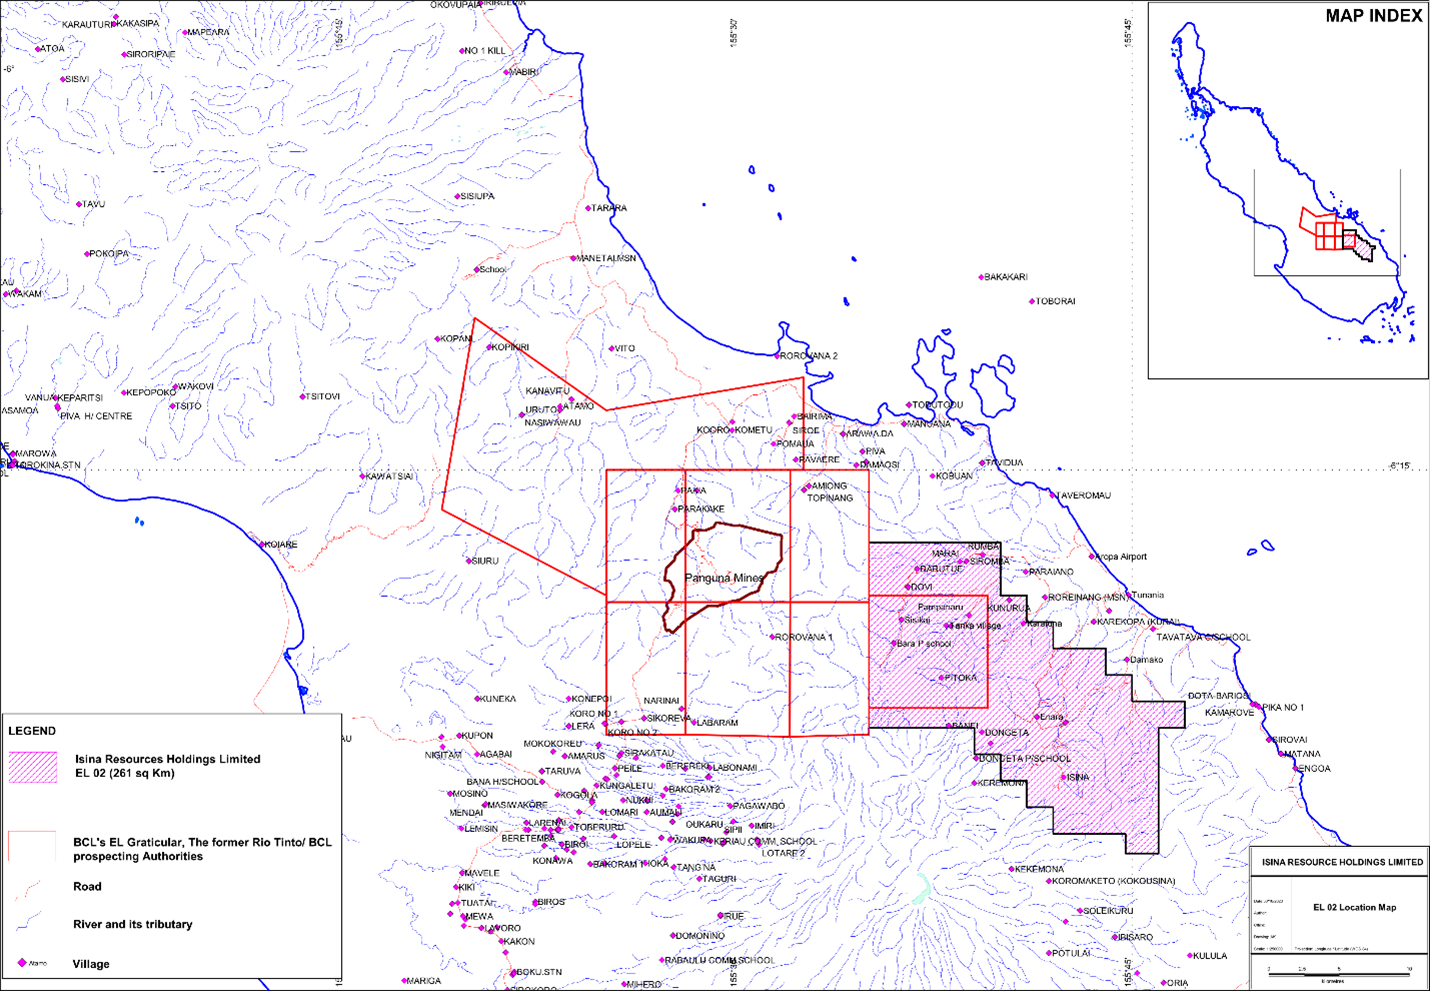 Map of Central Bougainville Showing Historic Panguna Licenses and EL02